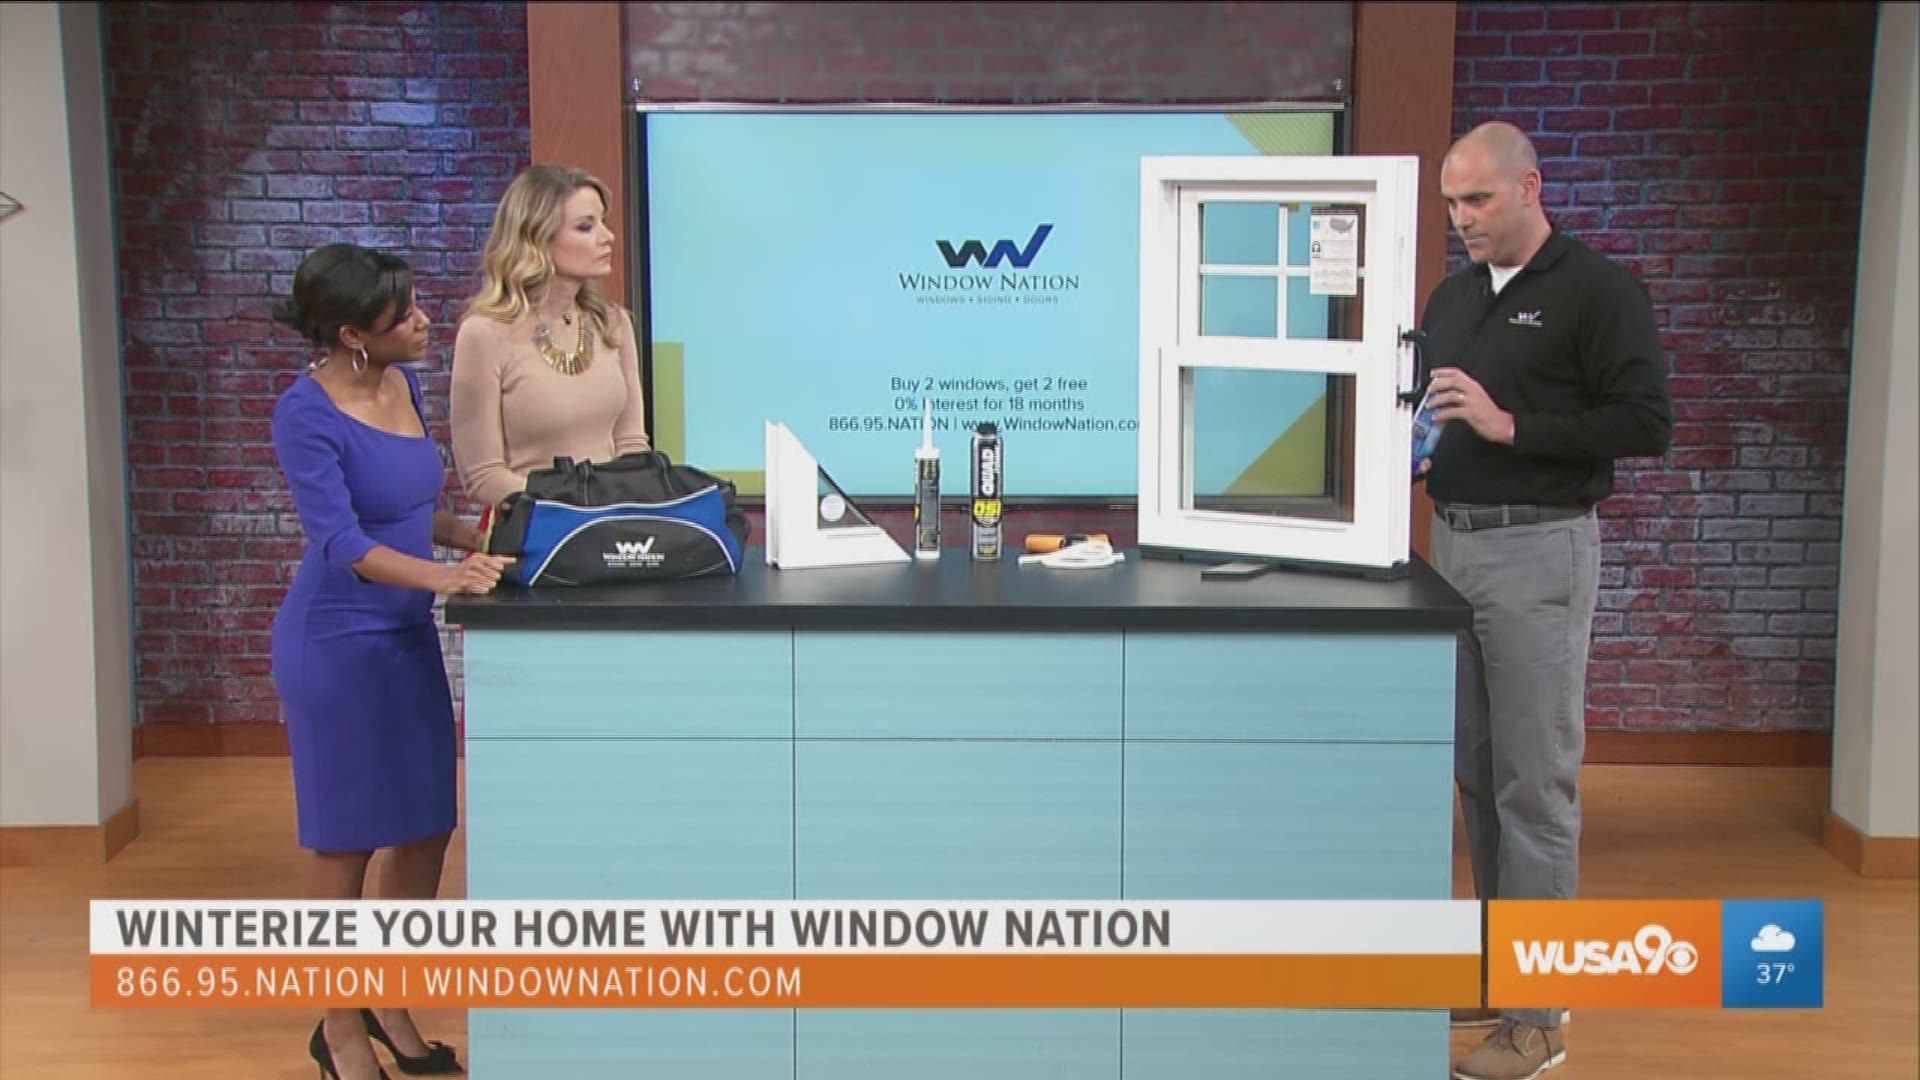 Joseph Downey of Window Nation explains how you can keep the cold air out and enjoy lower heating costs this winter. When you buy 2 windows you get 2 windows free, plus 0% interest on your financing for 6 months!  For more information call 866-95NATION or visit www.windownation.com